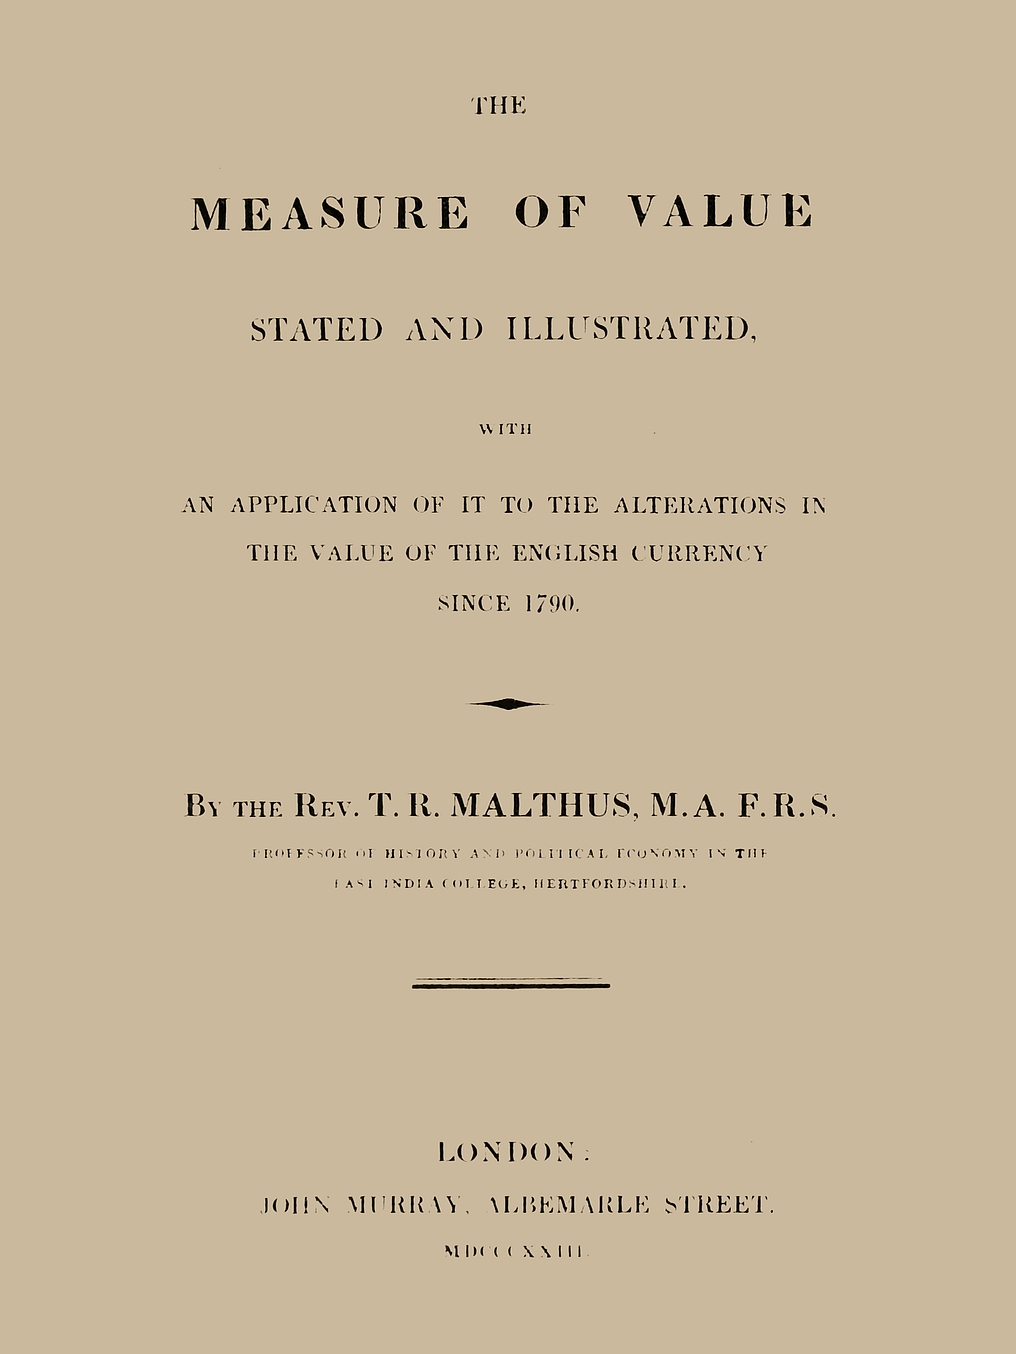 The Measure of Value Stated and Illustrated&#10;With an Application of it to the Alterations in the Value of the English Currency since 1790